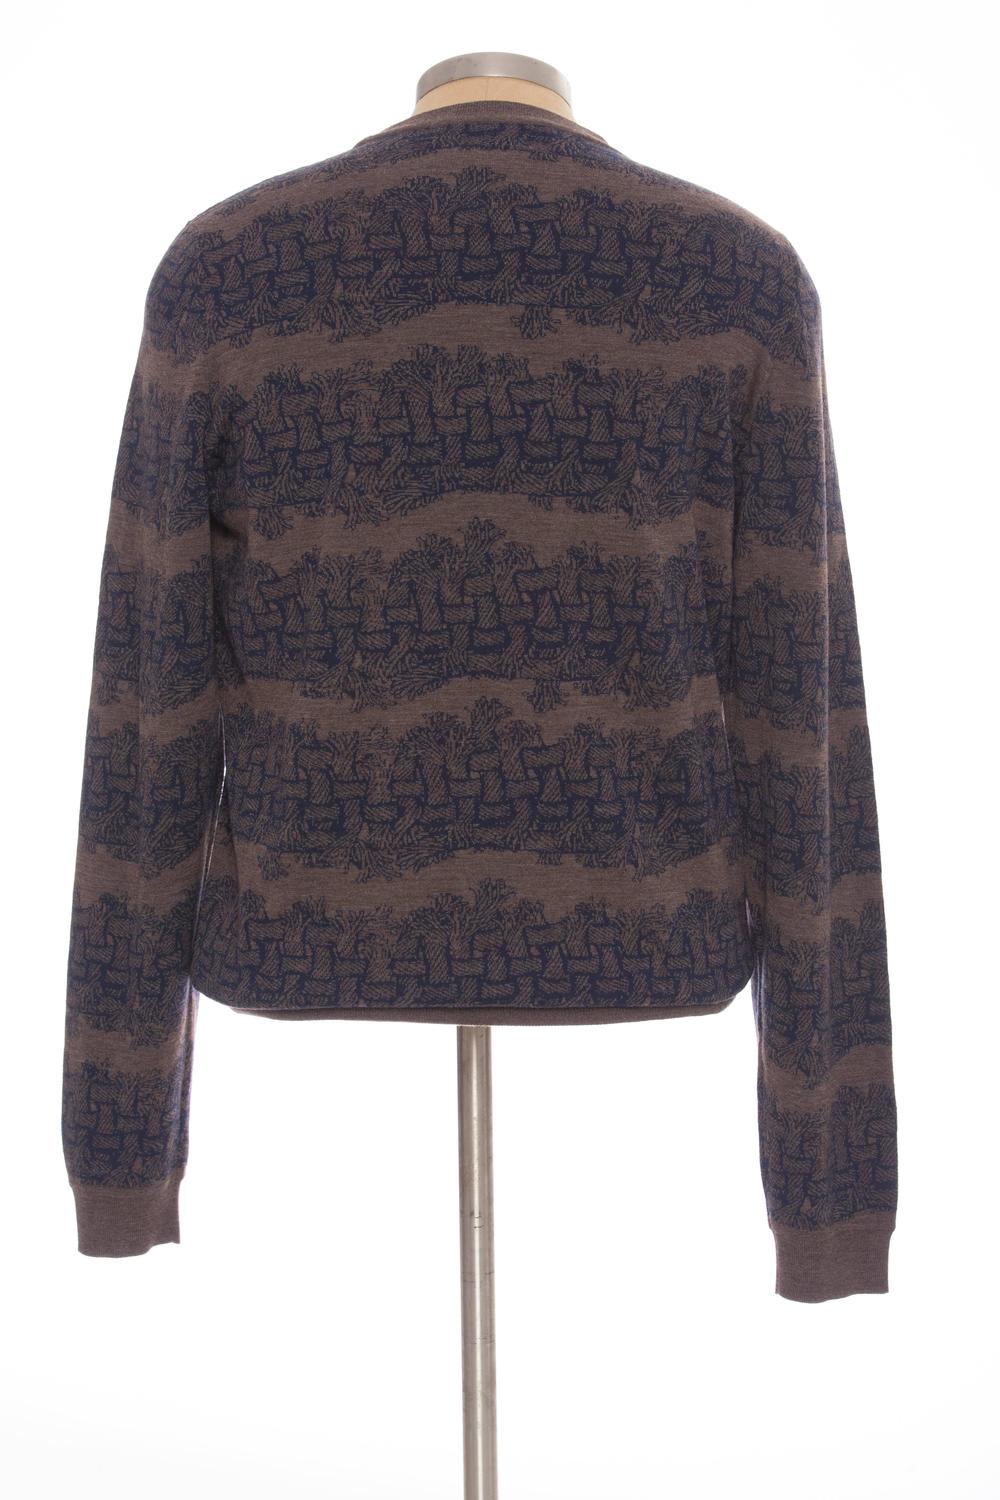 Louis Vuitton Christopher Nemeth Men&#39;s Wool Sweater With Rope Pattern, Fall 2015 For Sale at 1stdibs